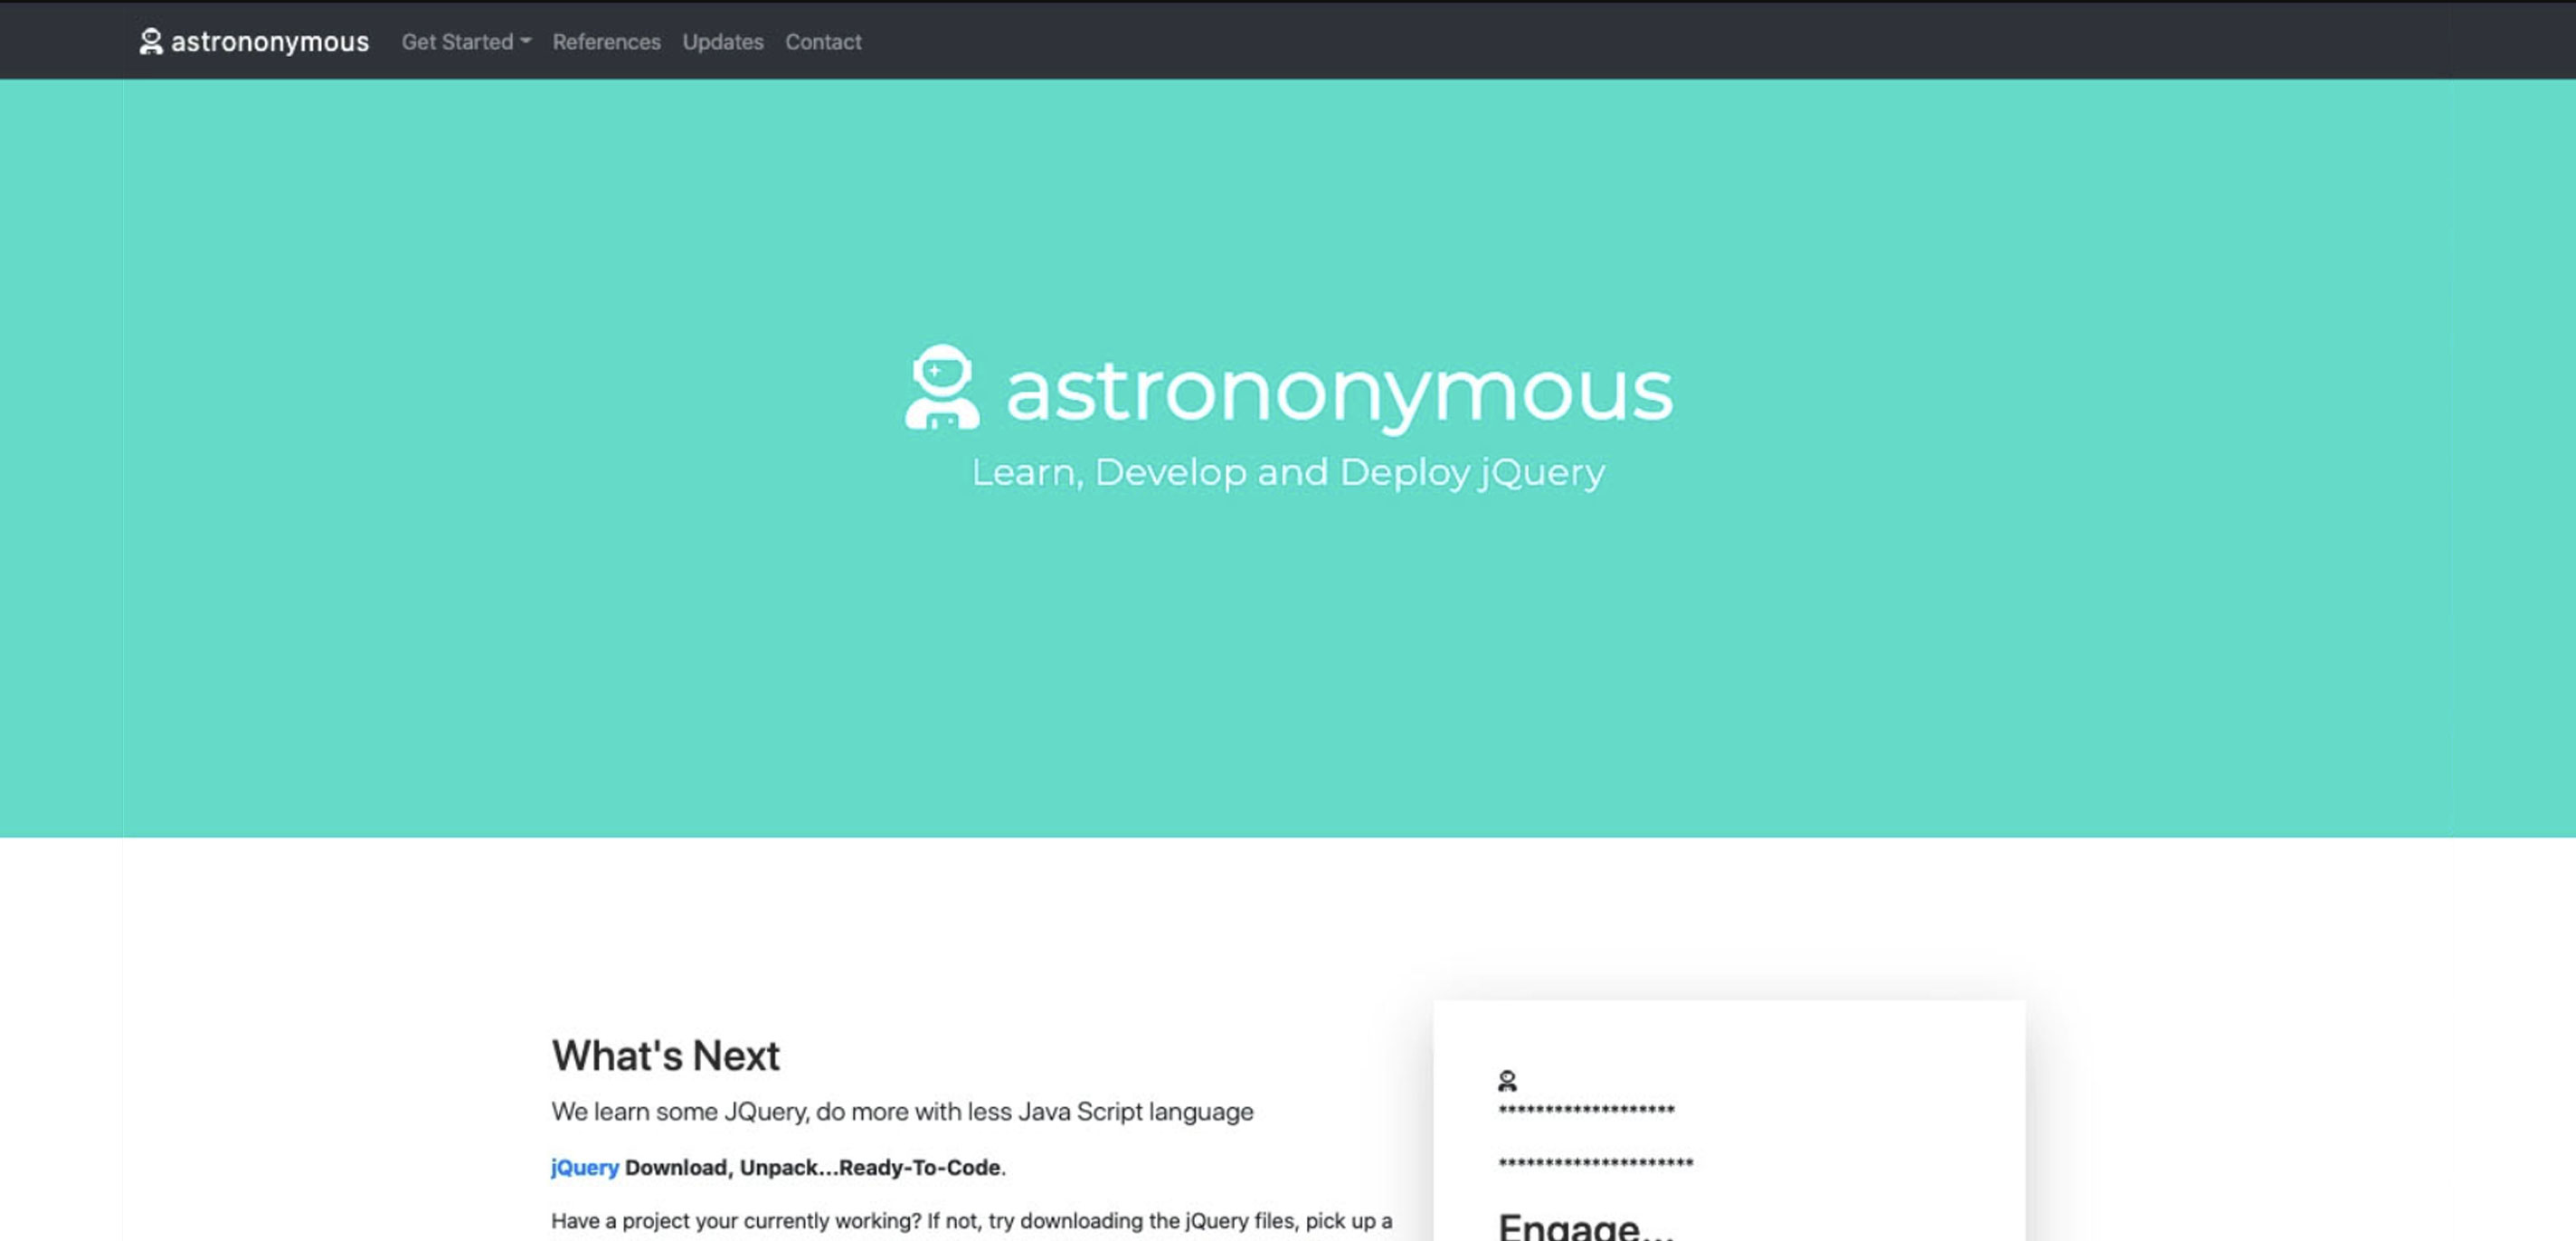 Astrononymous Learning JQuery